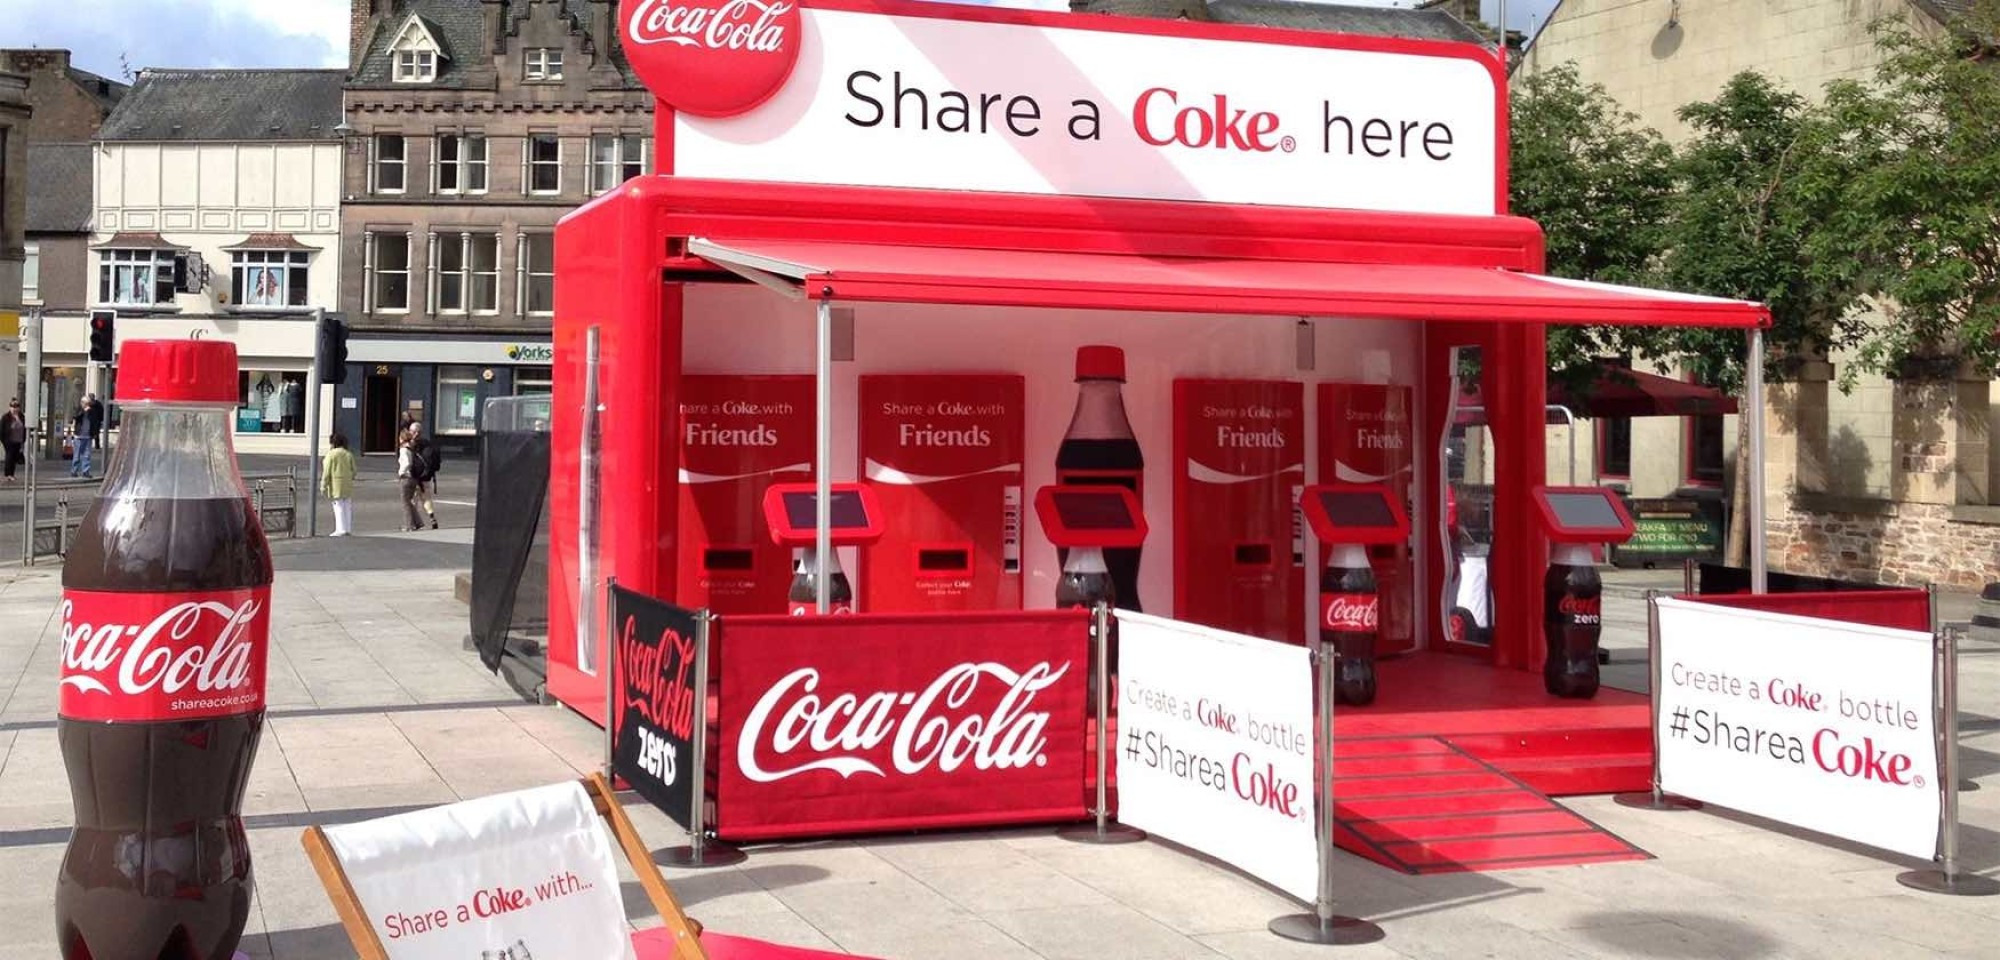 The “Share a Coke” campaign went on tour so people in selected cities around the world could personalize a bottle of Coke at the sharing stations. title=